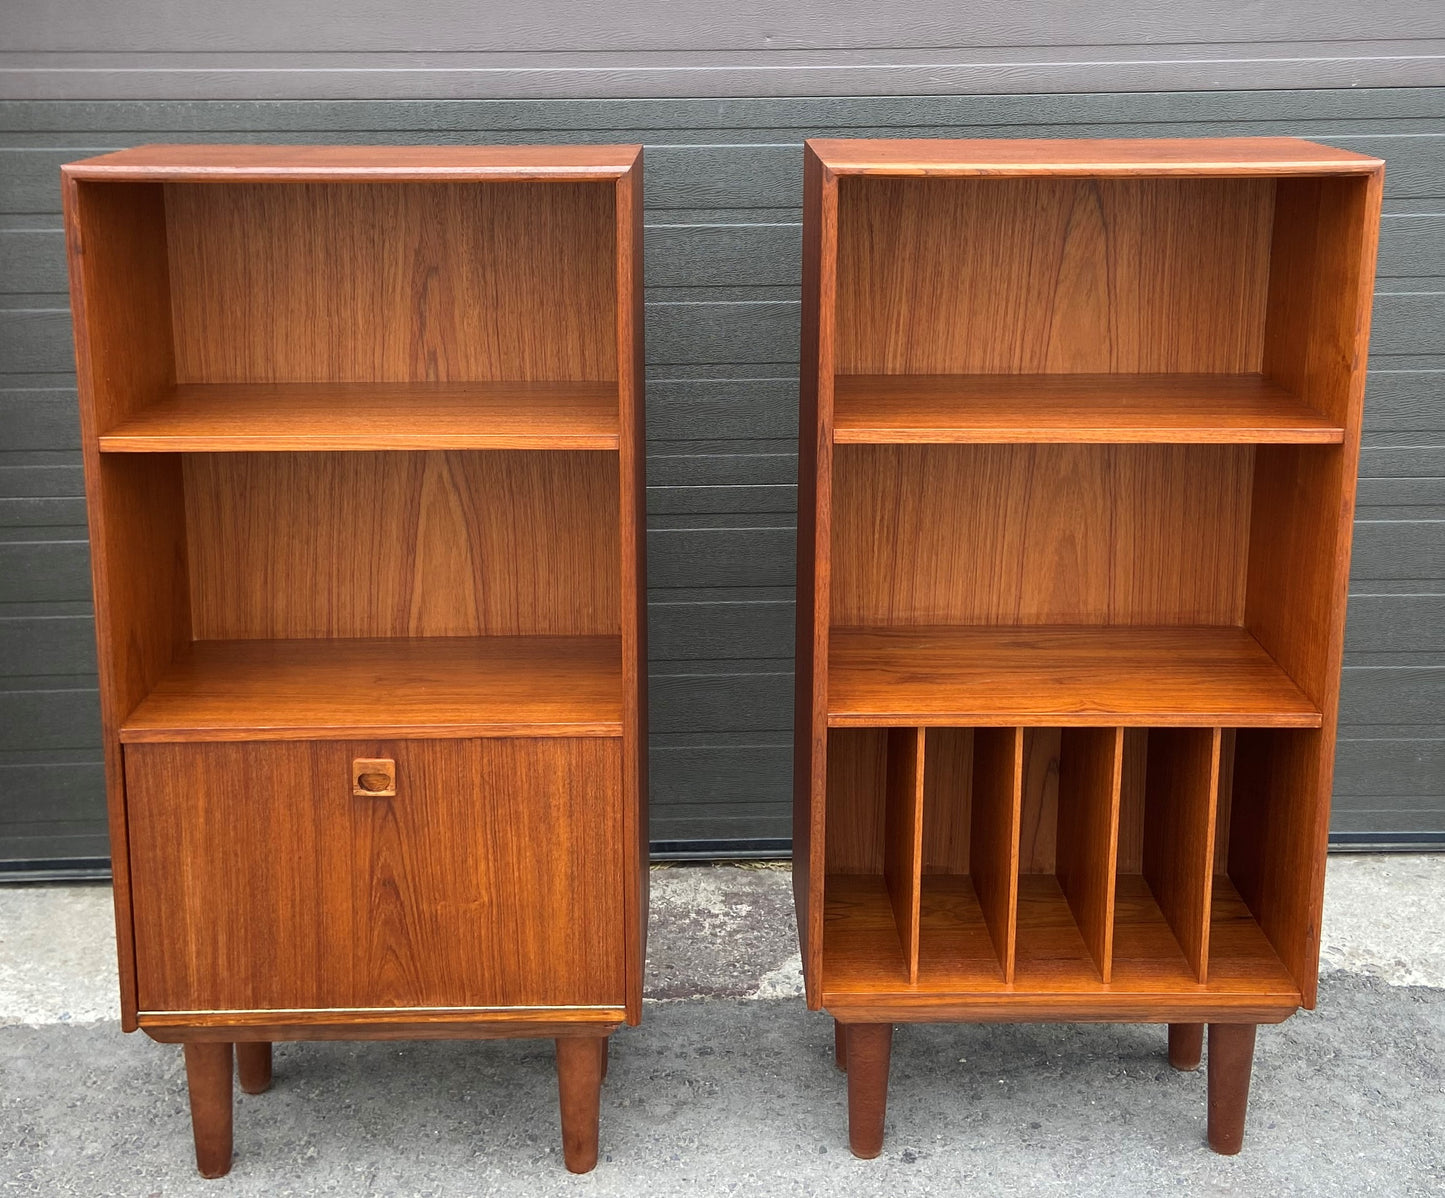 REFINISHED Danish MCM Record Cabinet, compact